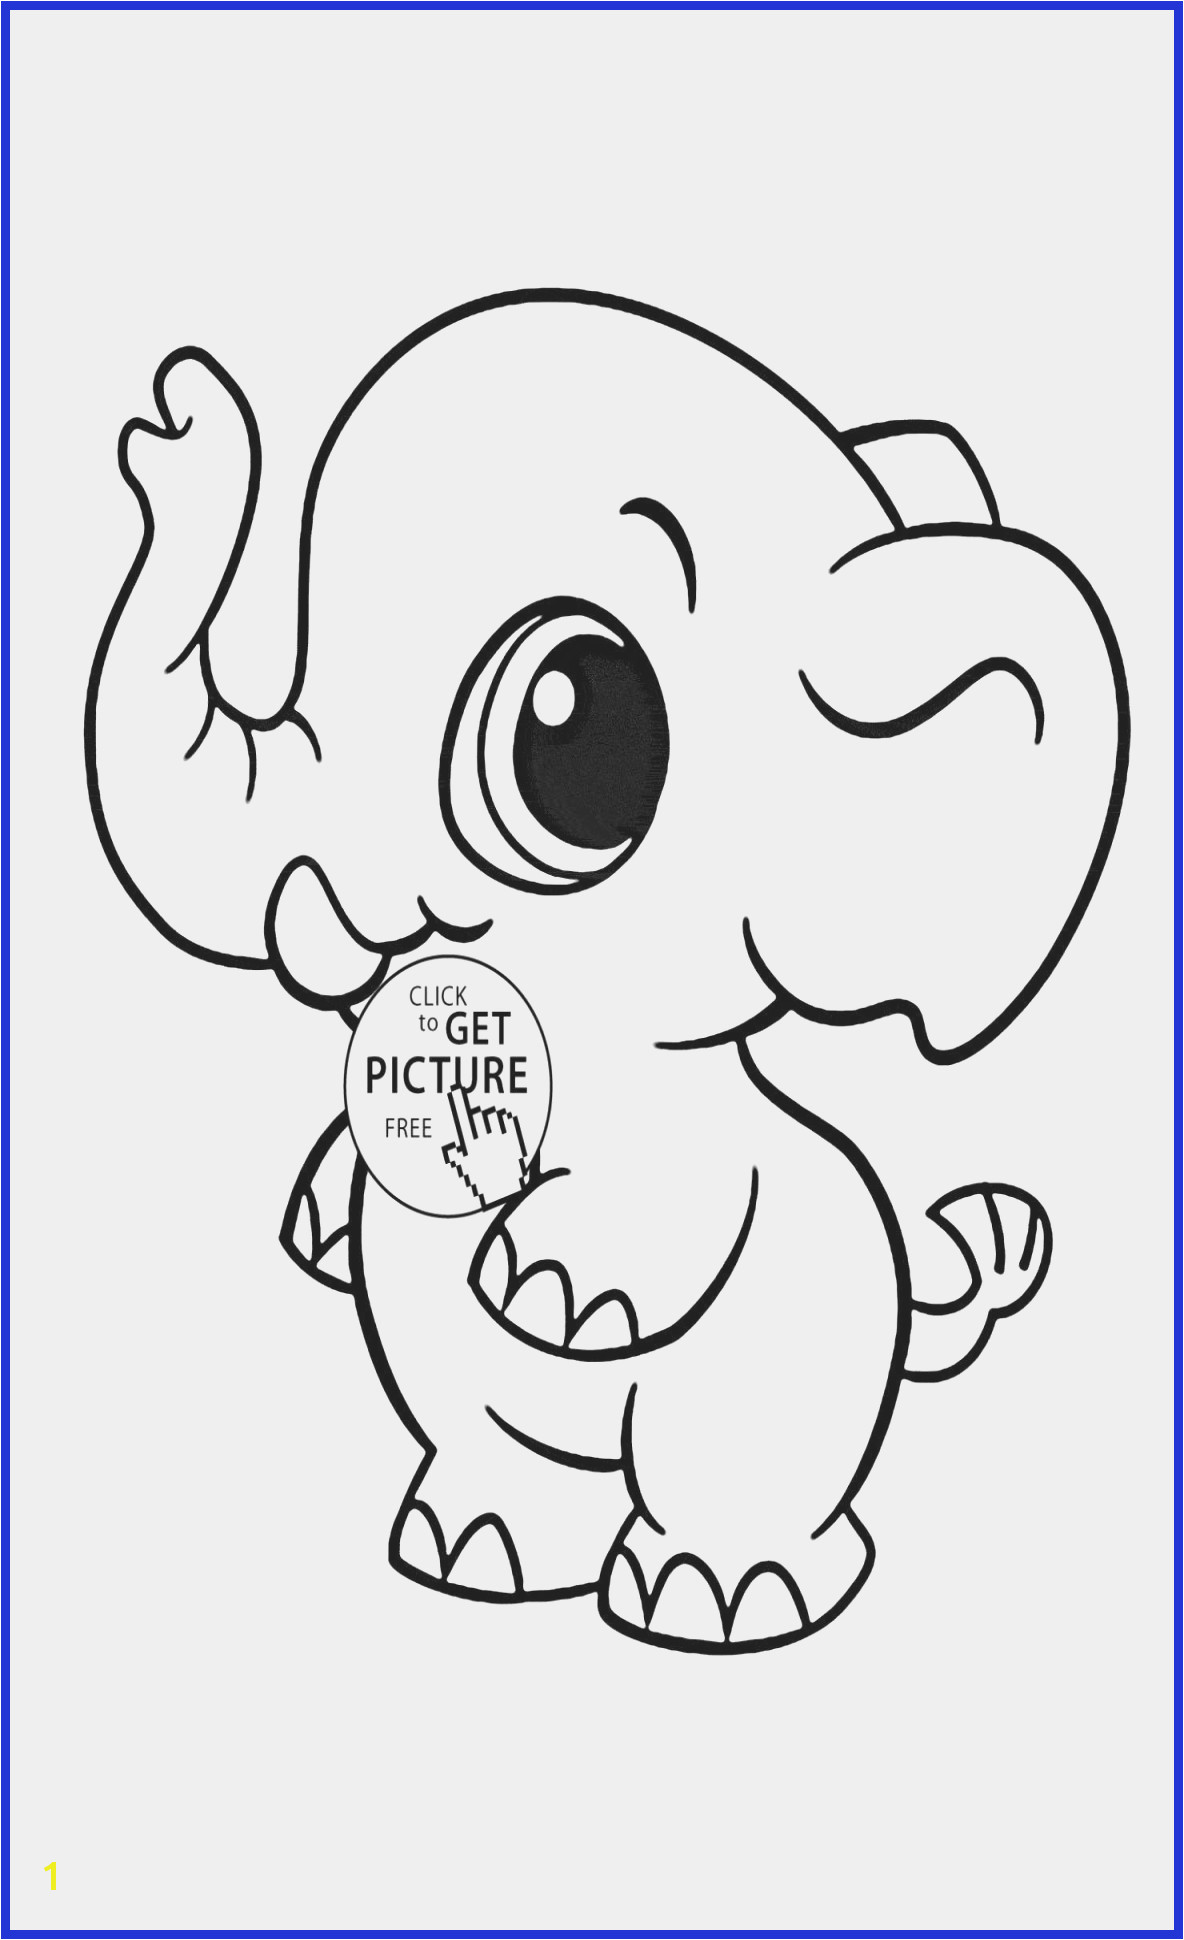 drawing printables 0d archives se telefonyfo free coloring pages for christmas inspirational printable od dog